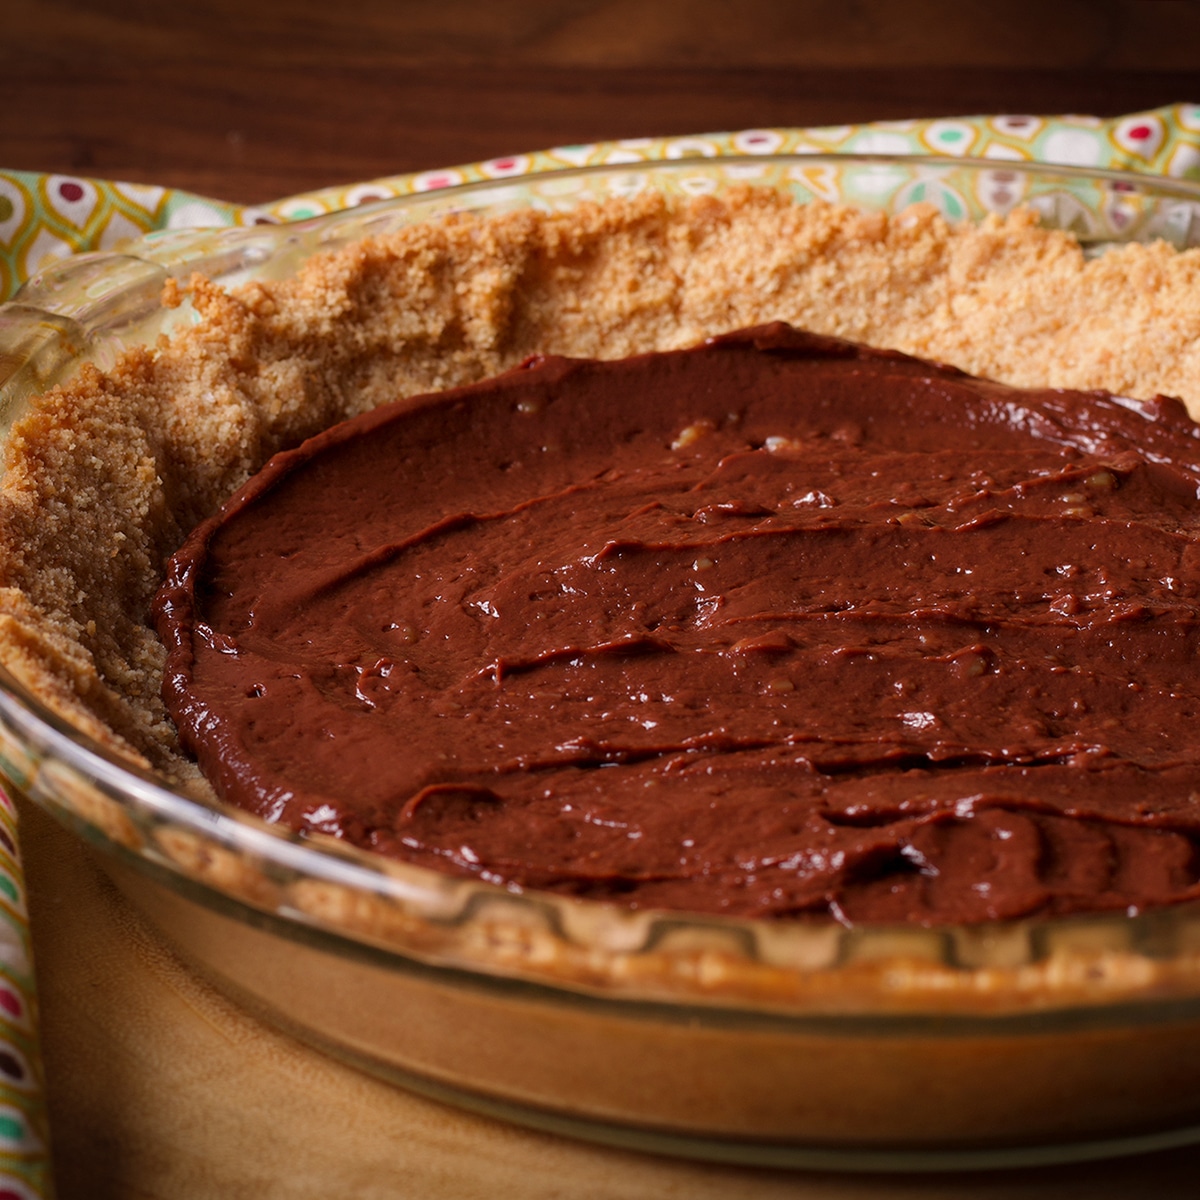 A pie plate containing a vanilla wafer crust and chocolate pastry cream.